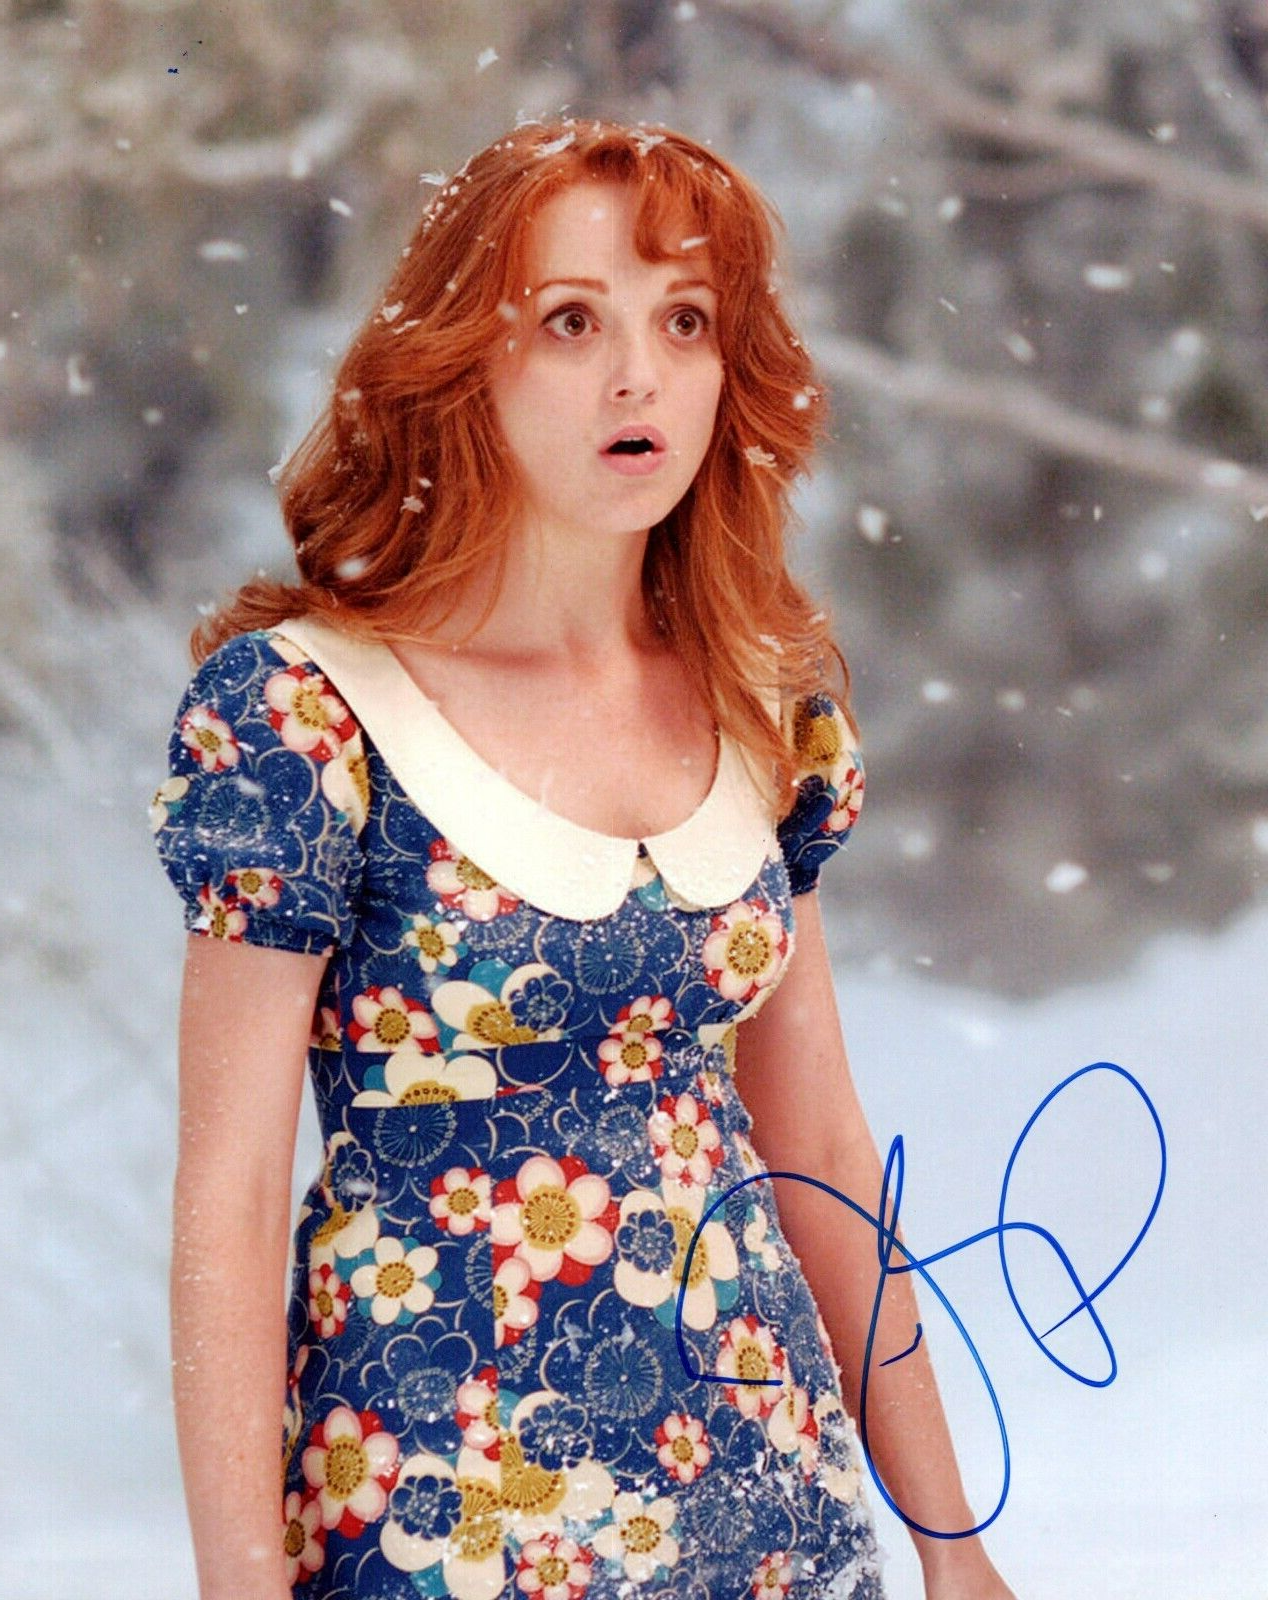 Lucy Daily - Jayma Mays Epic Movie autographed photo signed 8x10 #2 Lucy | eBay